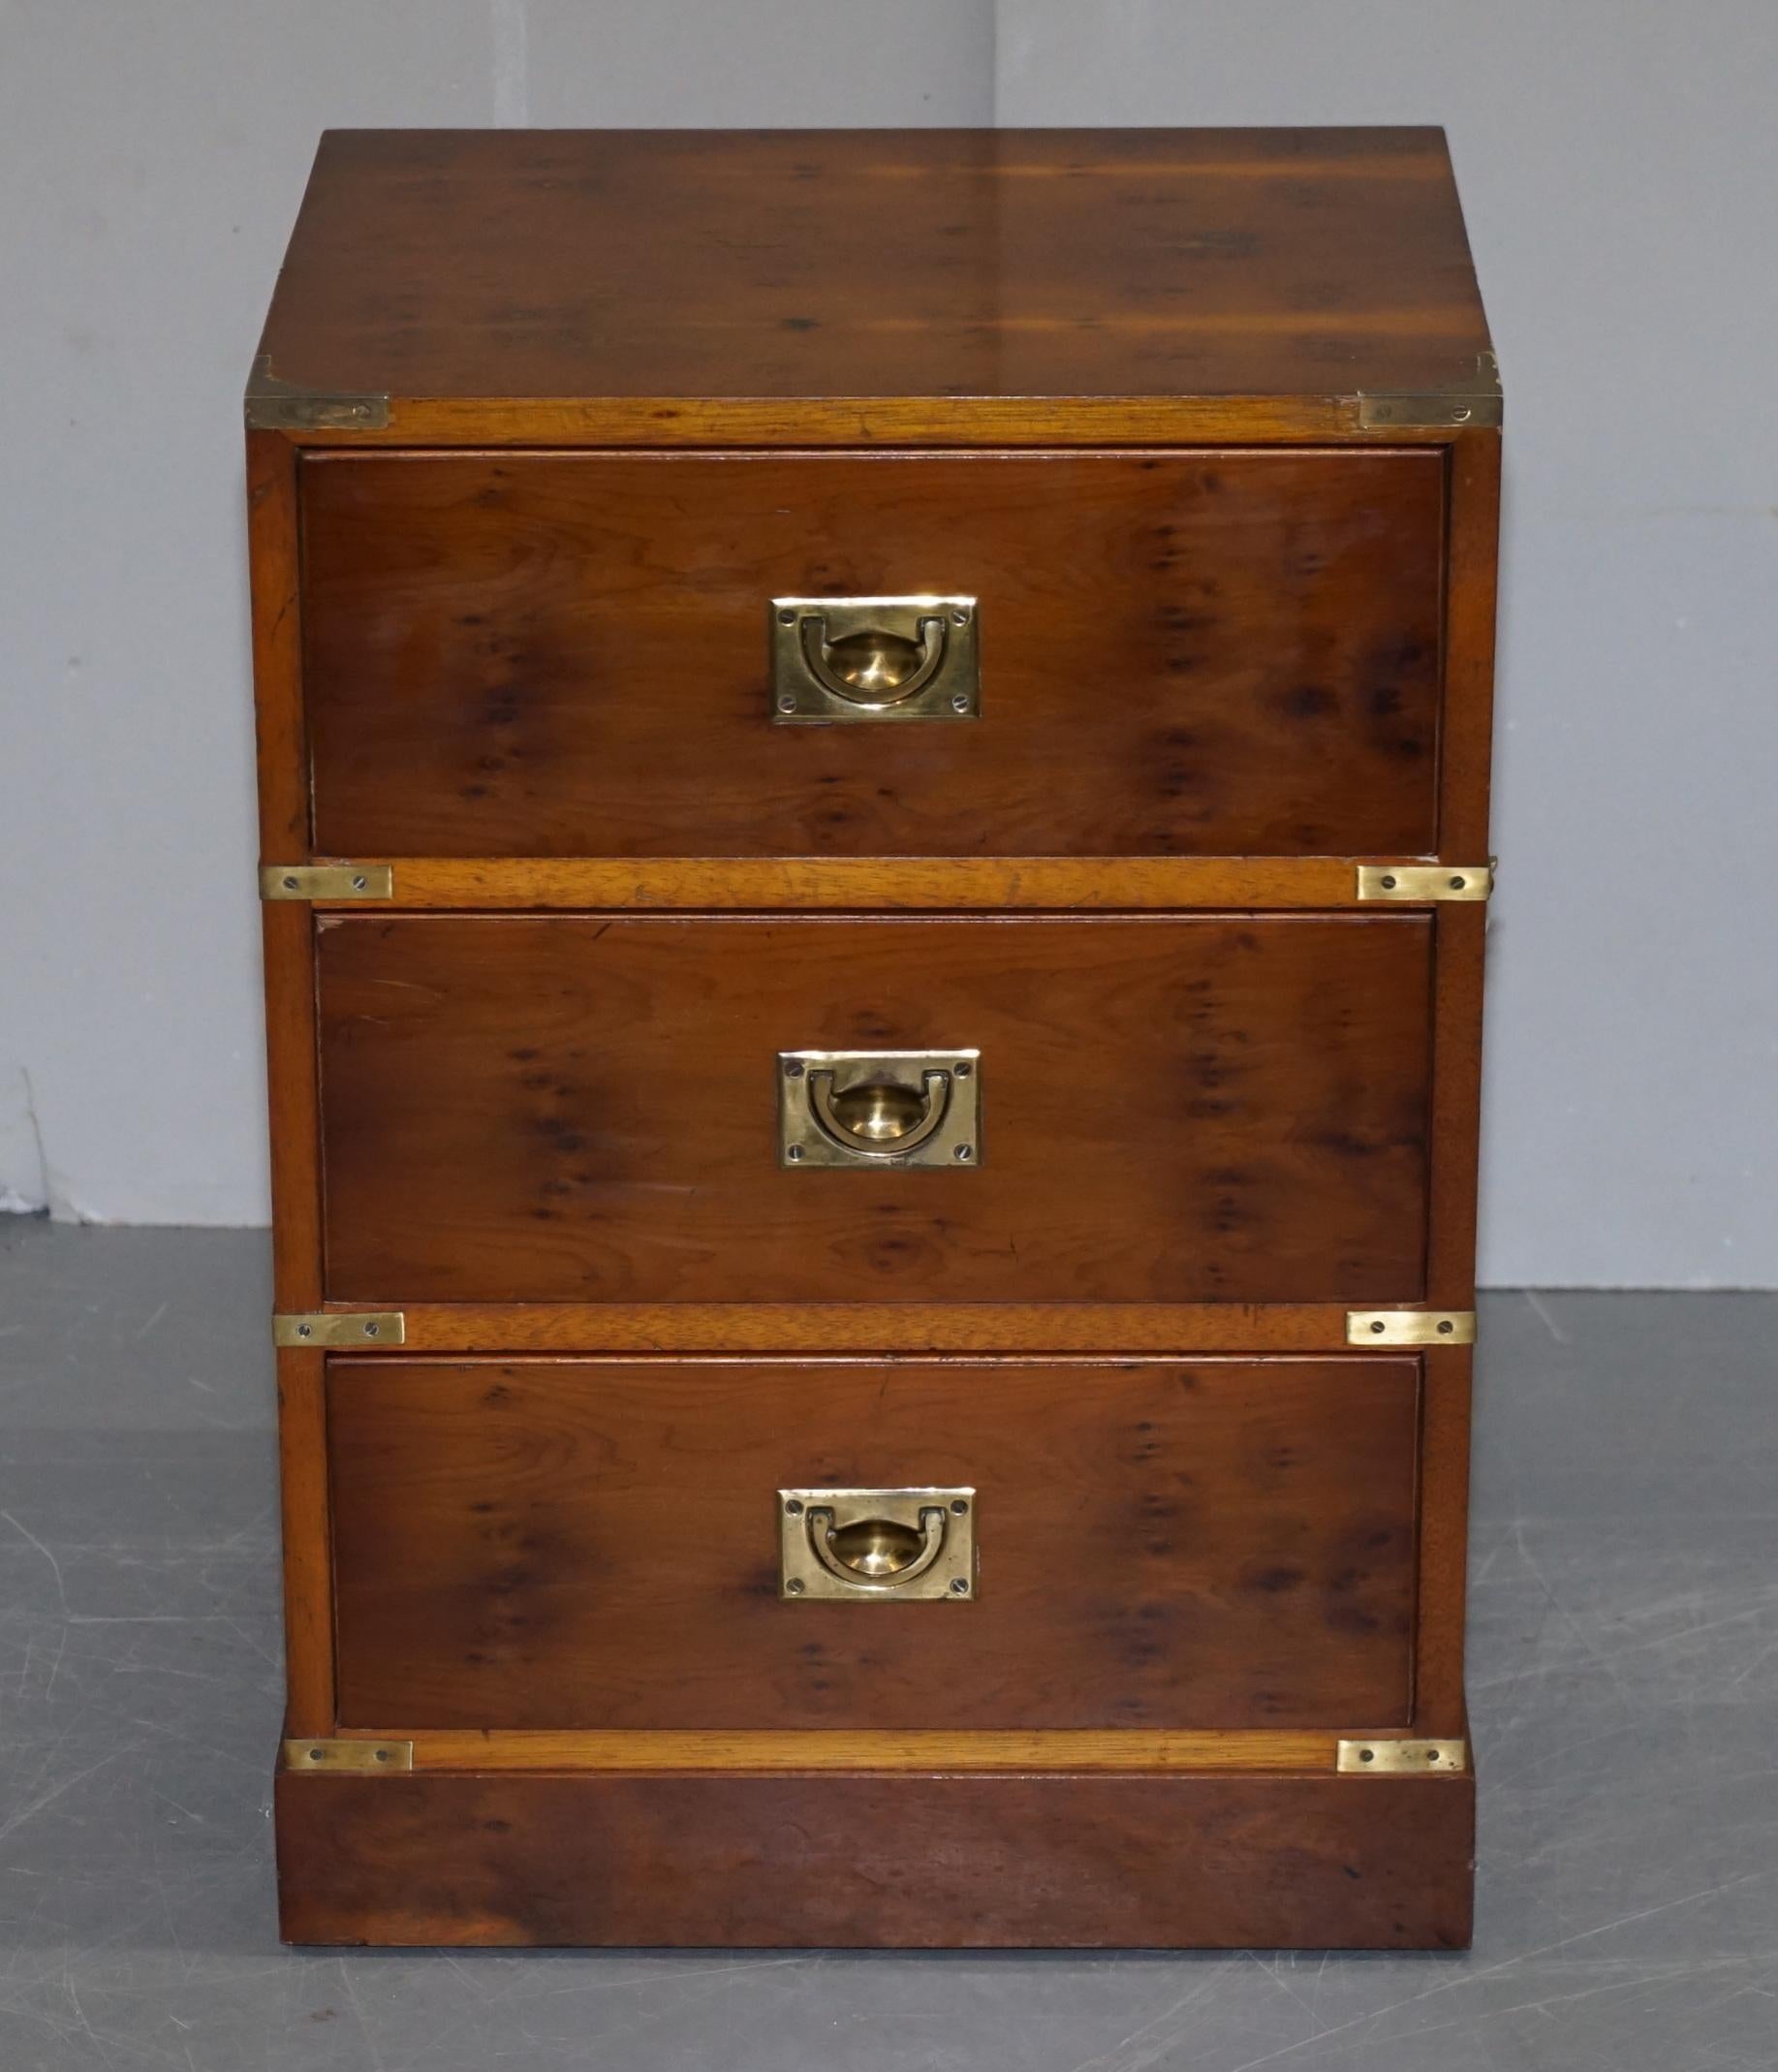 We are delighted to offer for sale this lovely Military Campaign style burr yew wood side table sized chest of drawers

A good looking well made and decorative little chest of drawers, made in the classic Campaign style, with burr yew wood